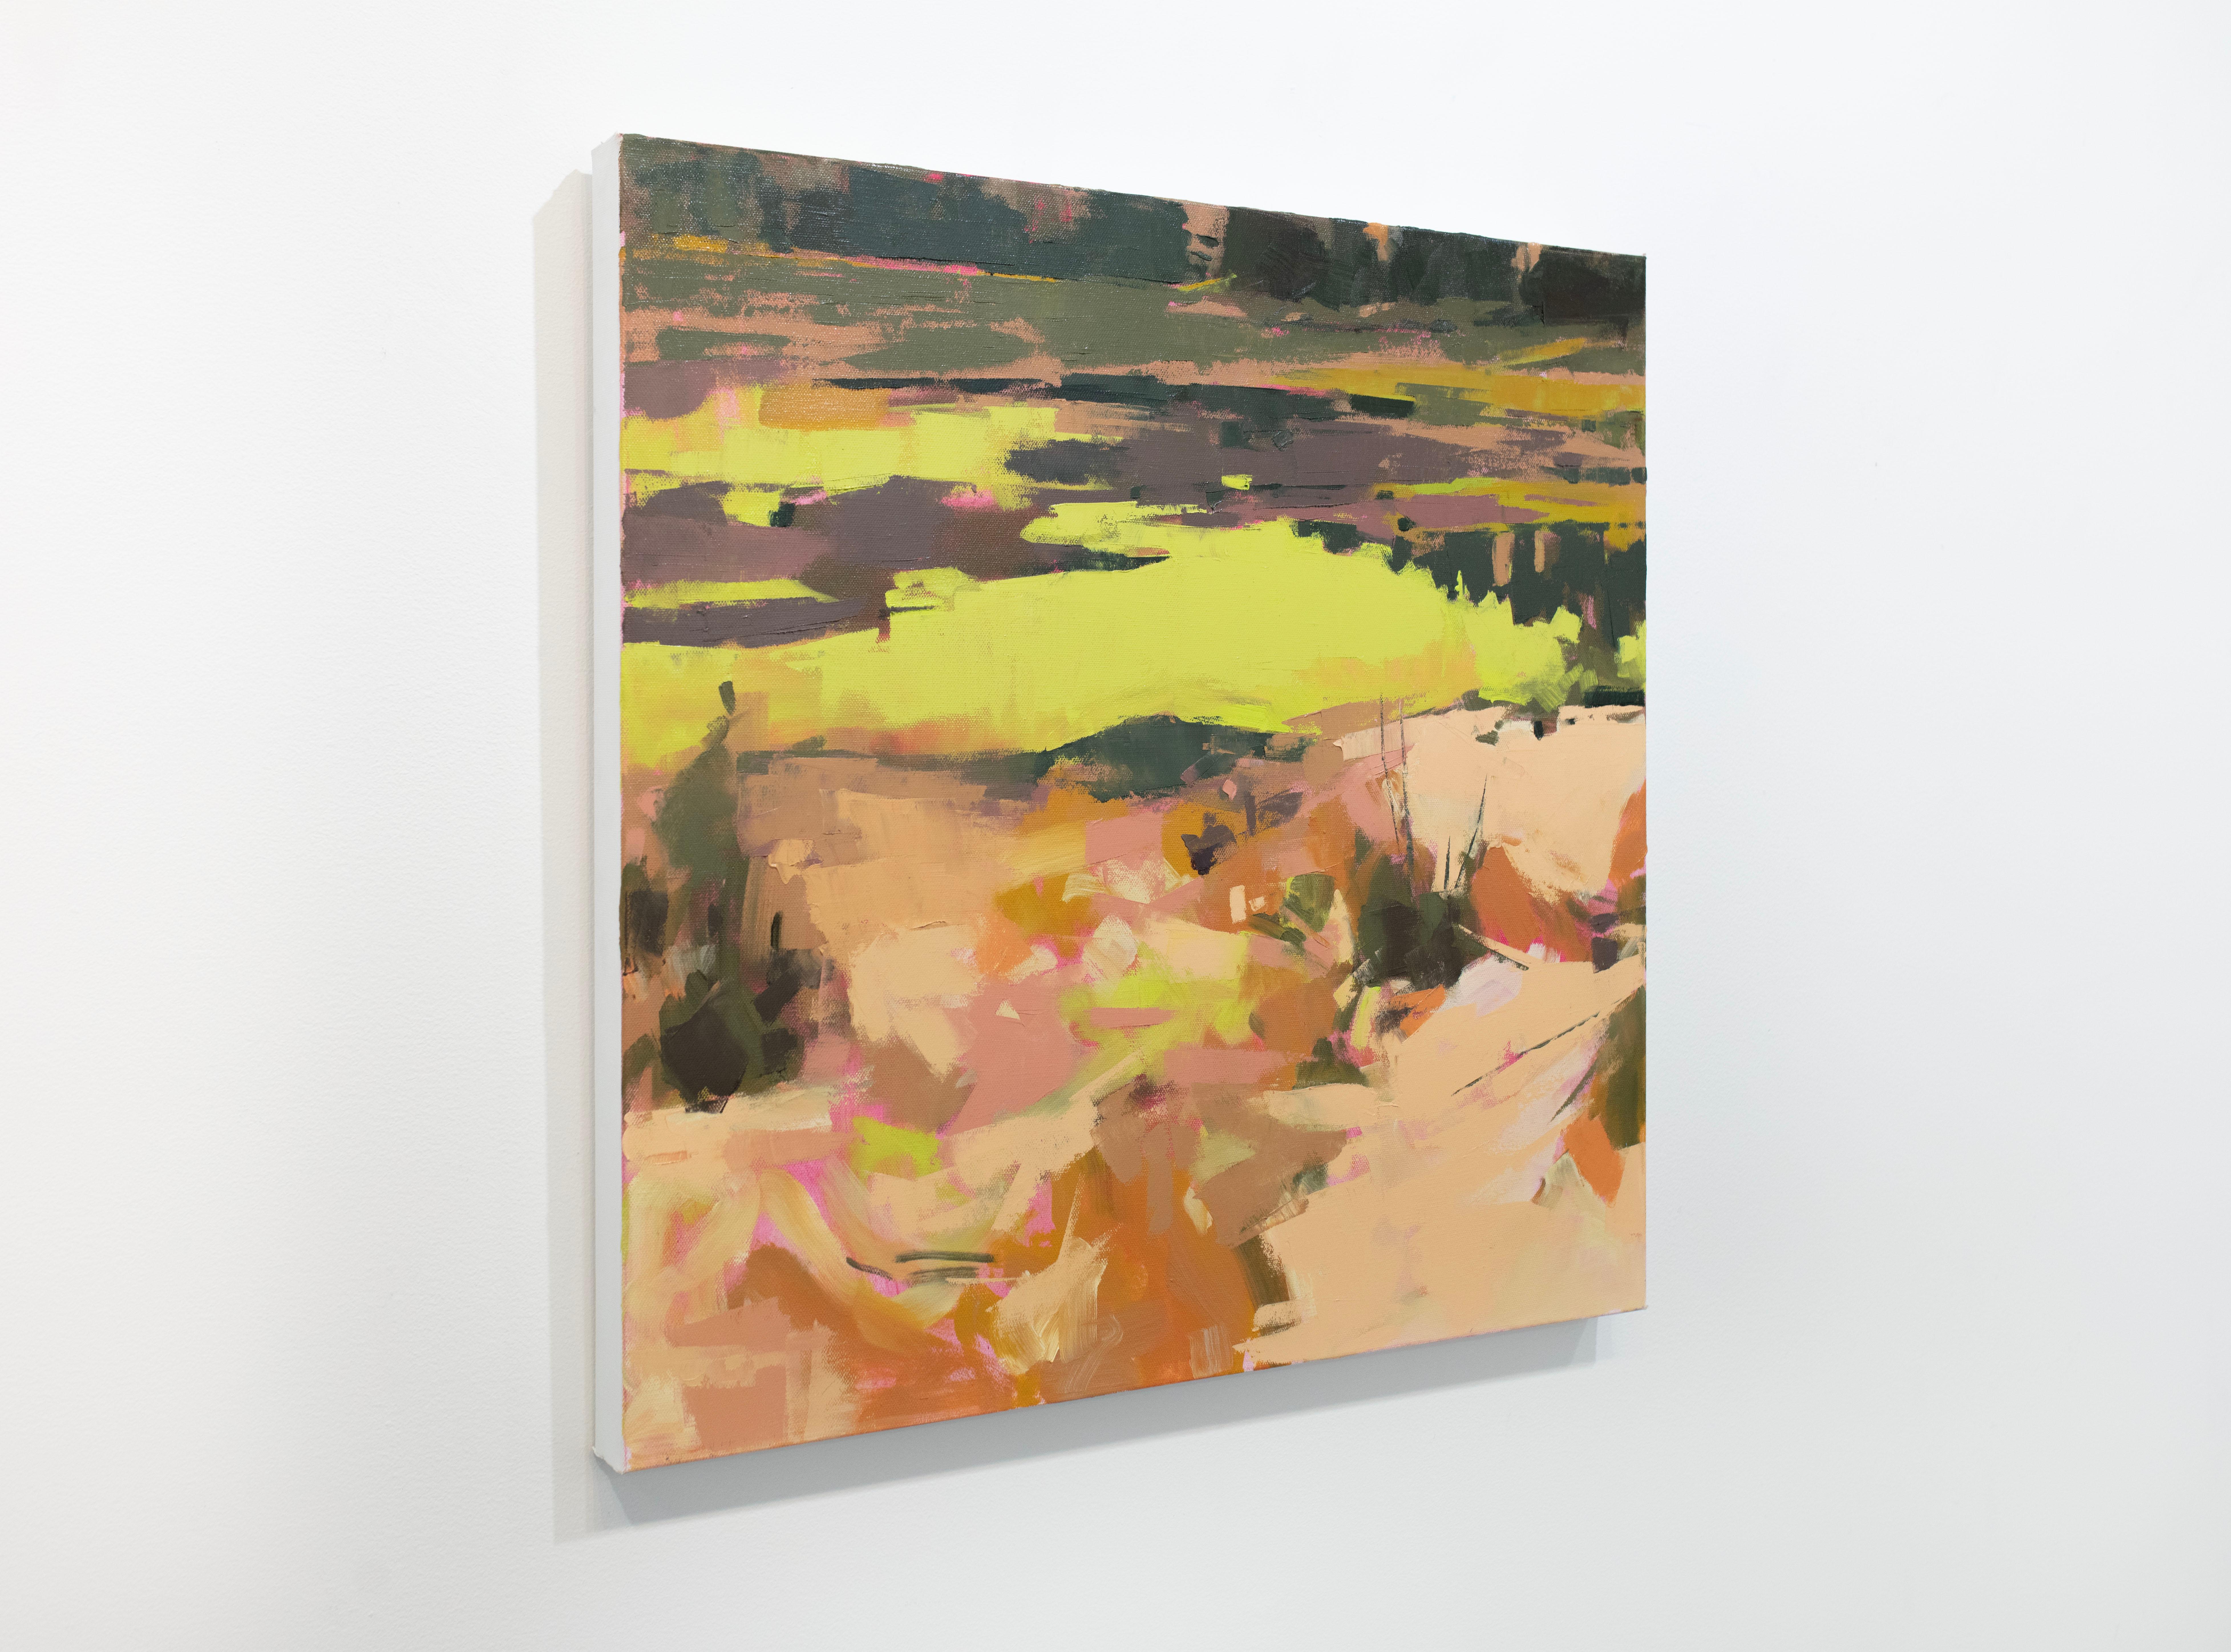 This original abstracted landscape oil painting by artist Bri Custer features a palette of muted orange and earth tones contrasted by vibrant yellow, and thick, loose paint strokes applied over the surface of the canvas. The painting is made on